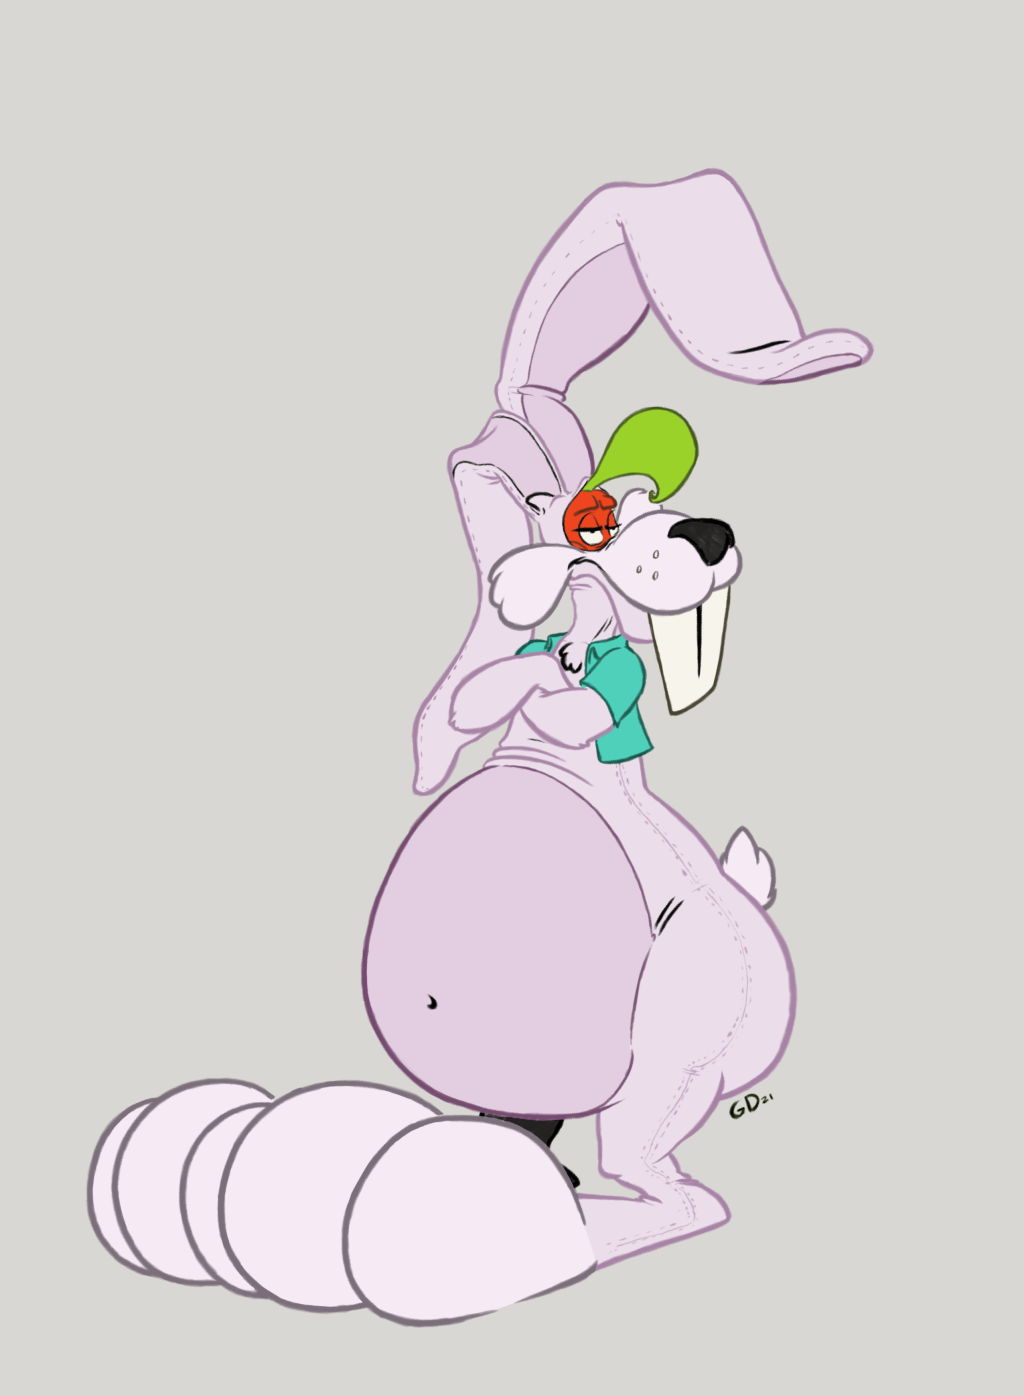 Most recent image: Happy Easter! - Suit Malfunction